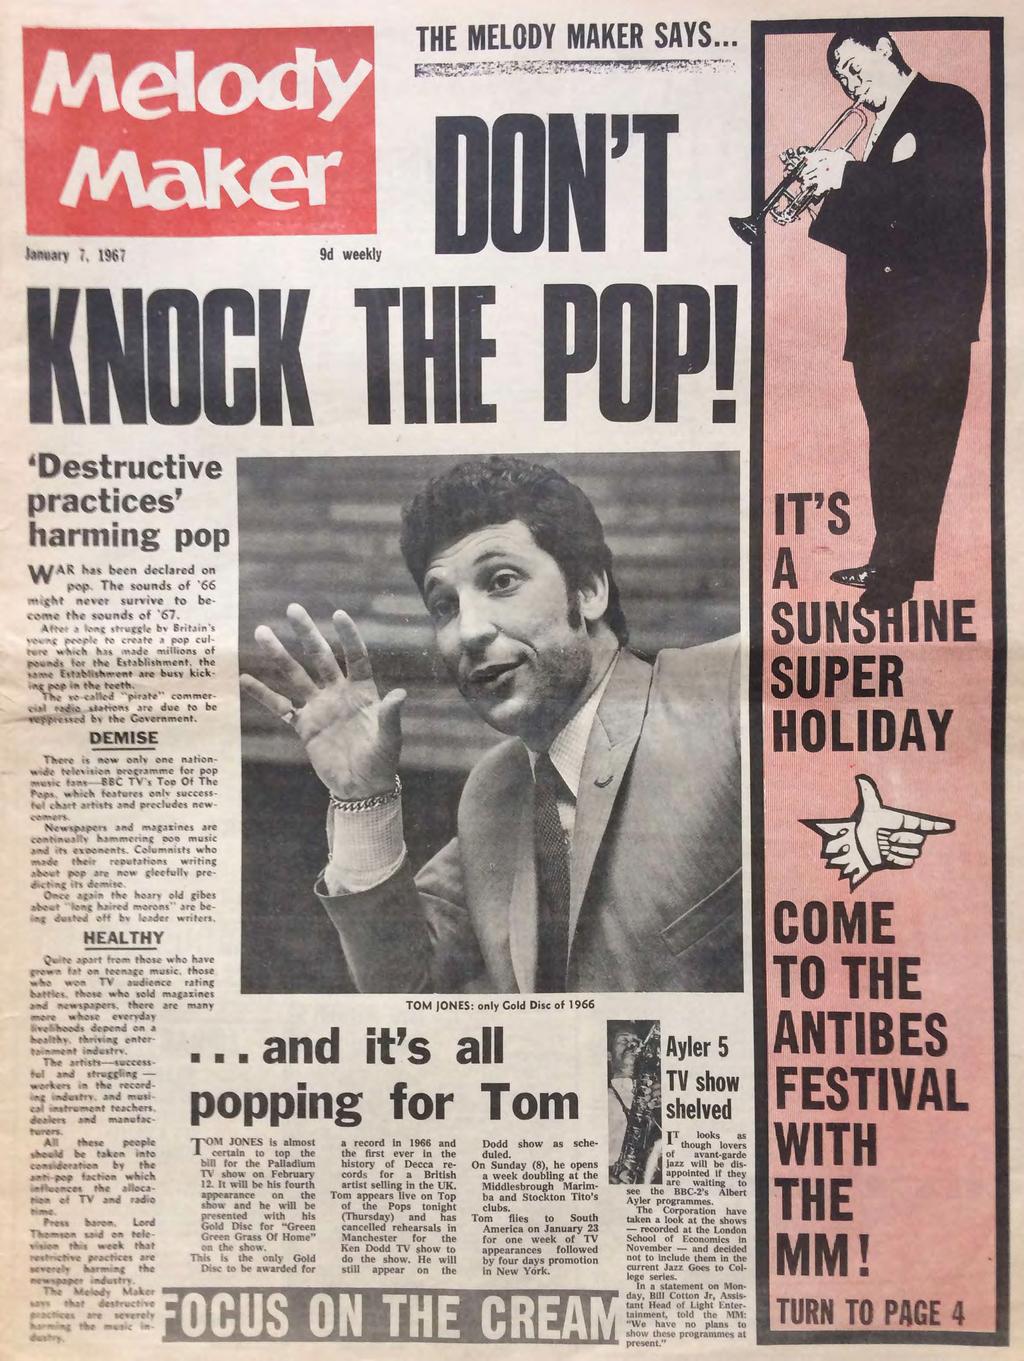 THE MELODY MAKER SAYS *wry T 1967 9d weekly ONT KNOCK THE POP!